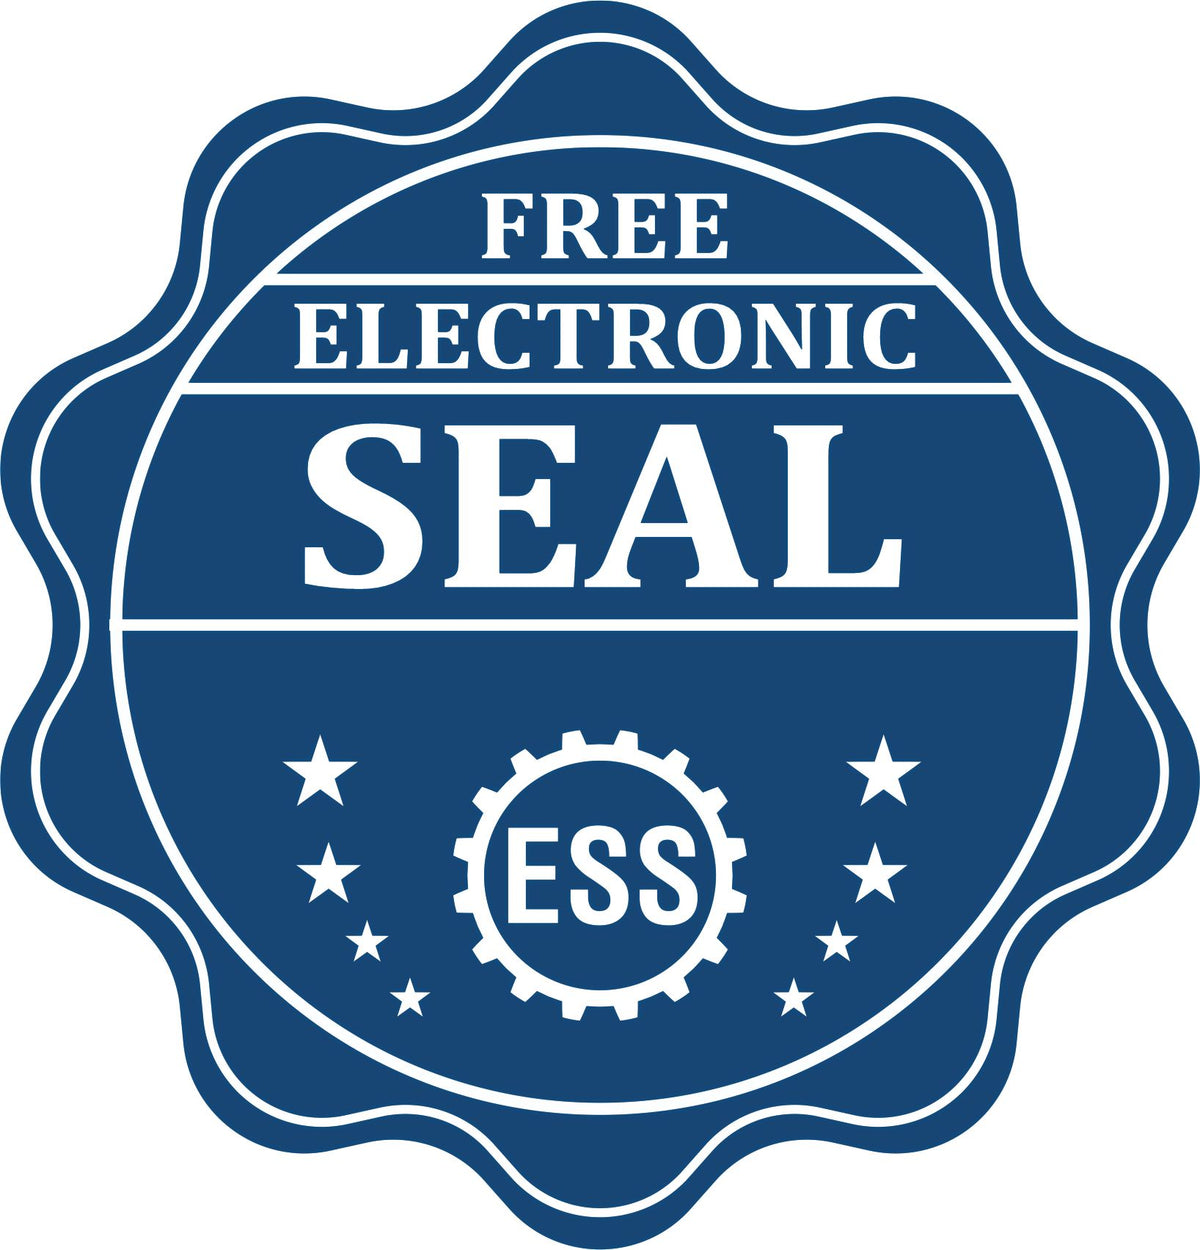 A badge showing a free electronic seal for the Slim Pre-Inked State Seal Notary Stamp for Louisiana with stars and the ESS gear on the emblem.